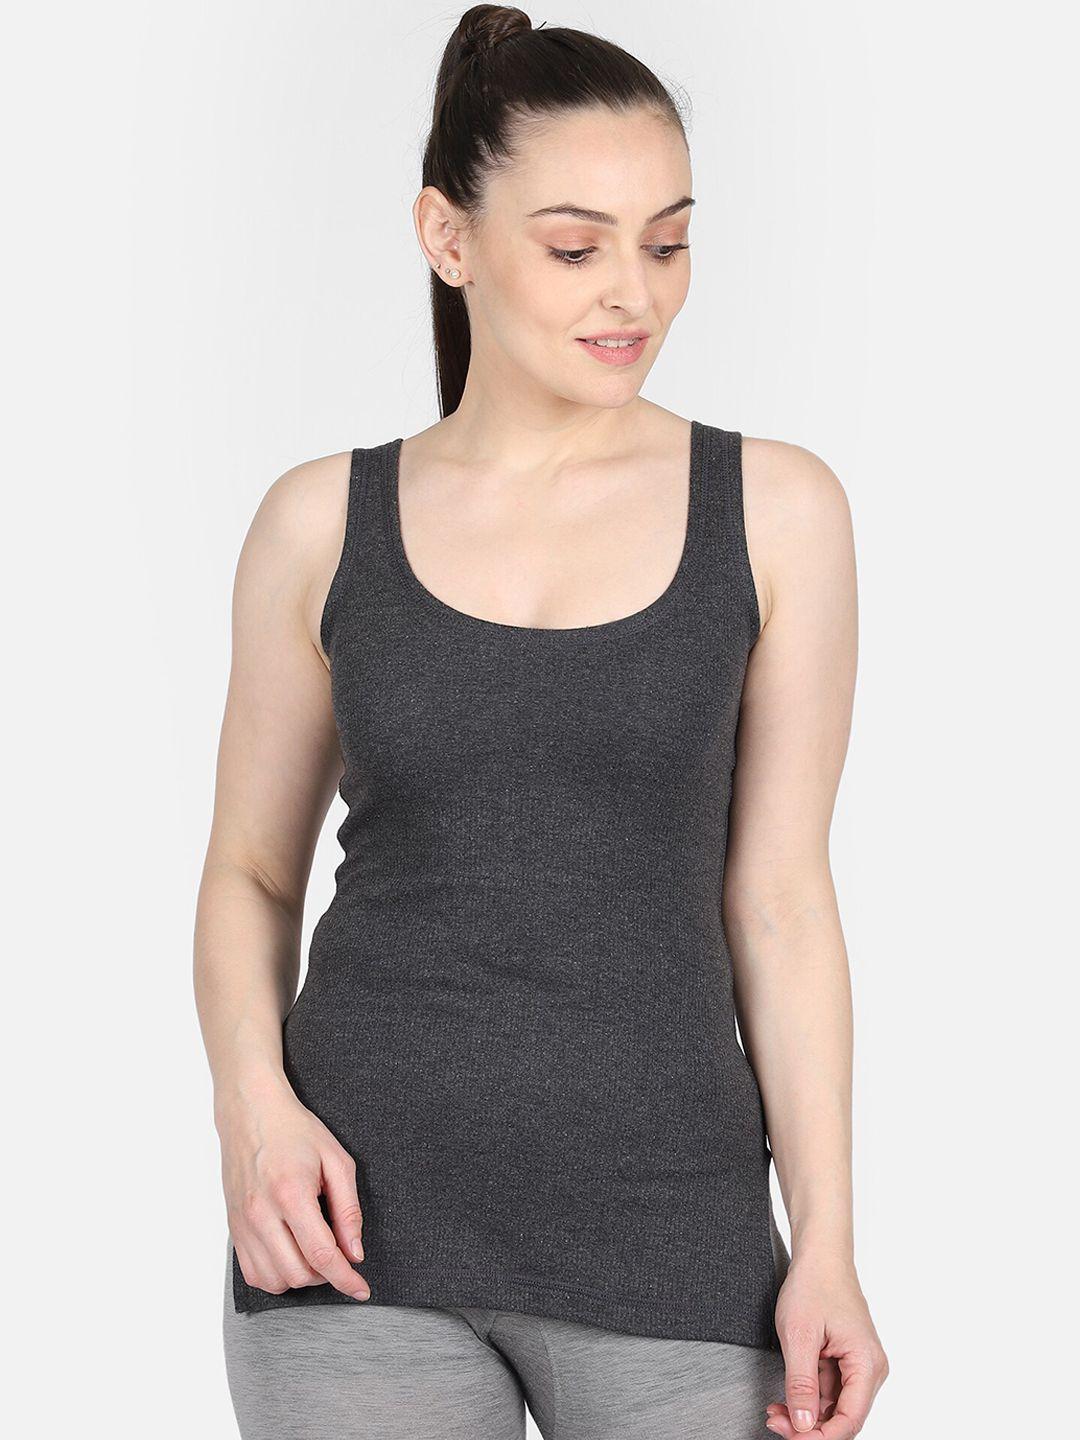 bodycare-insider-women-charcoal-grey-solid-thermal-top